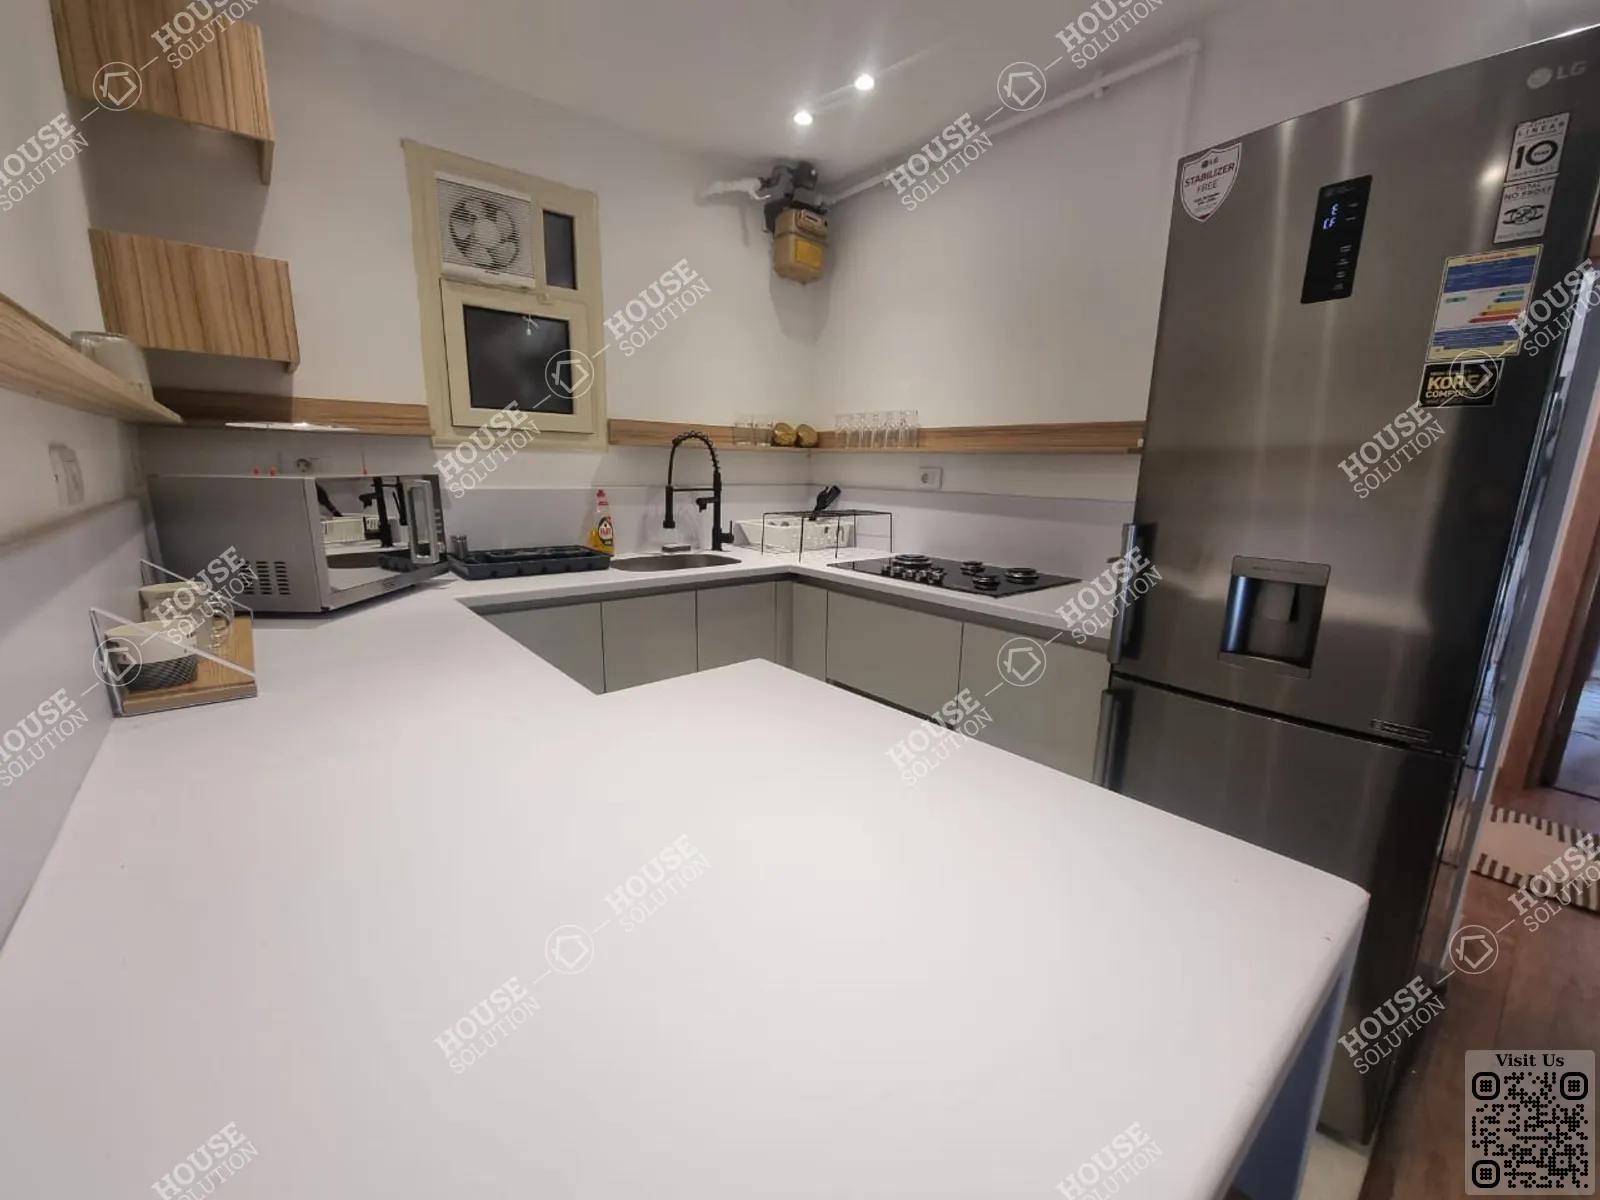 KITCHEN  @ Apartments For Rent In Maadi Maadi Degla Area: 130 m² consists of 2 Bedrooms 2 Bathrooms Modern furnished 5 stars #5760-2